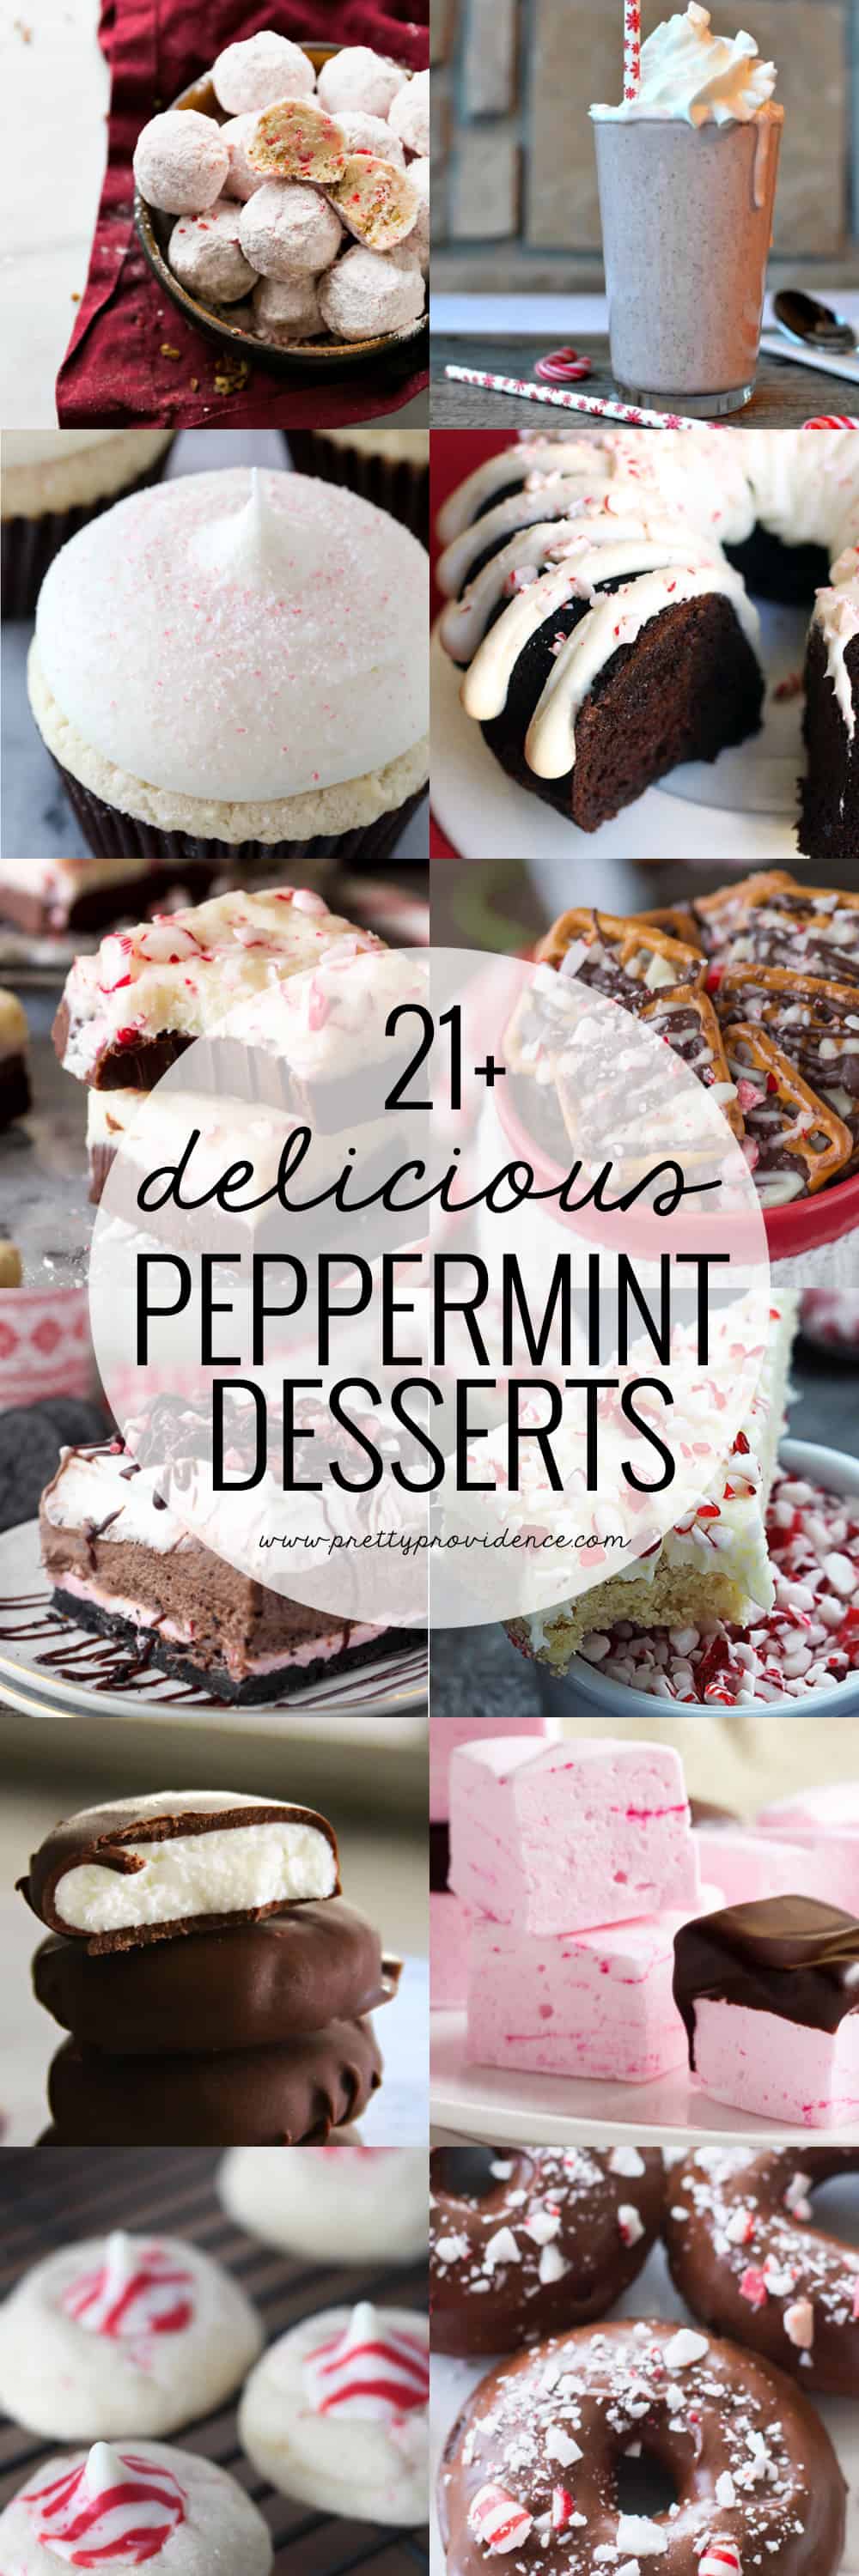 21+ delicious and unique peppermint dessert recipes! Literally ever single one of these is delicious, perfect to celebrate the most wonderful time of the year! 